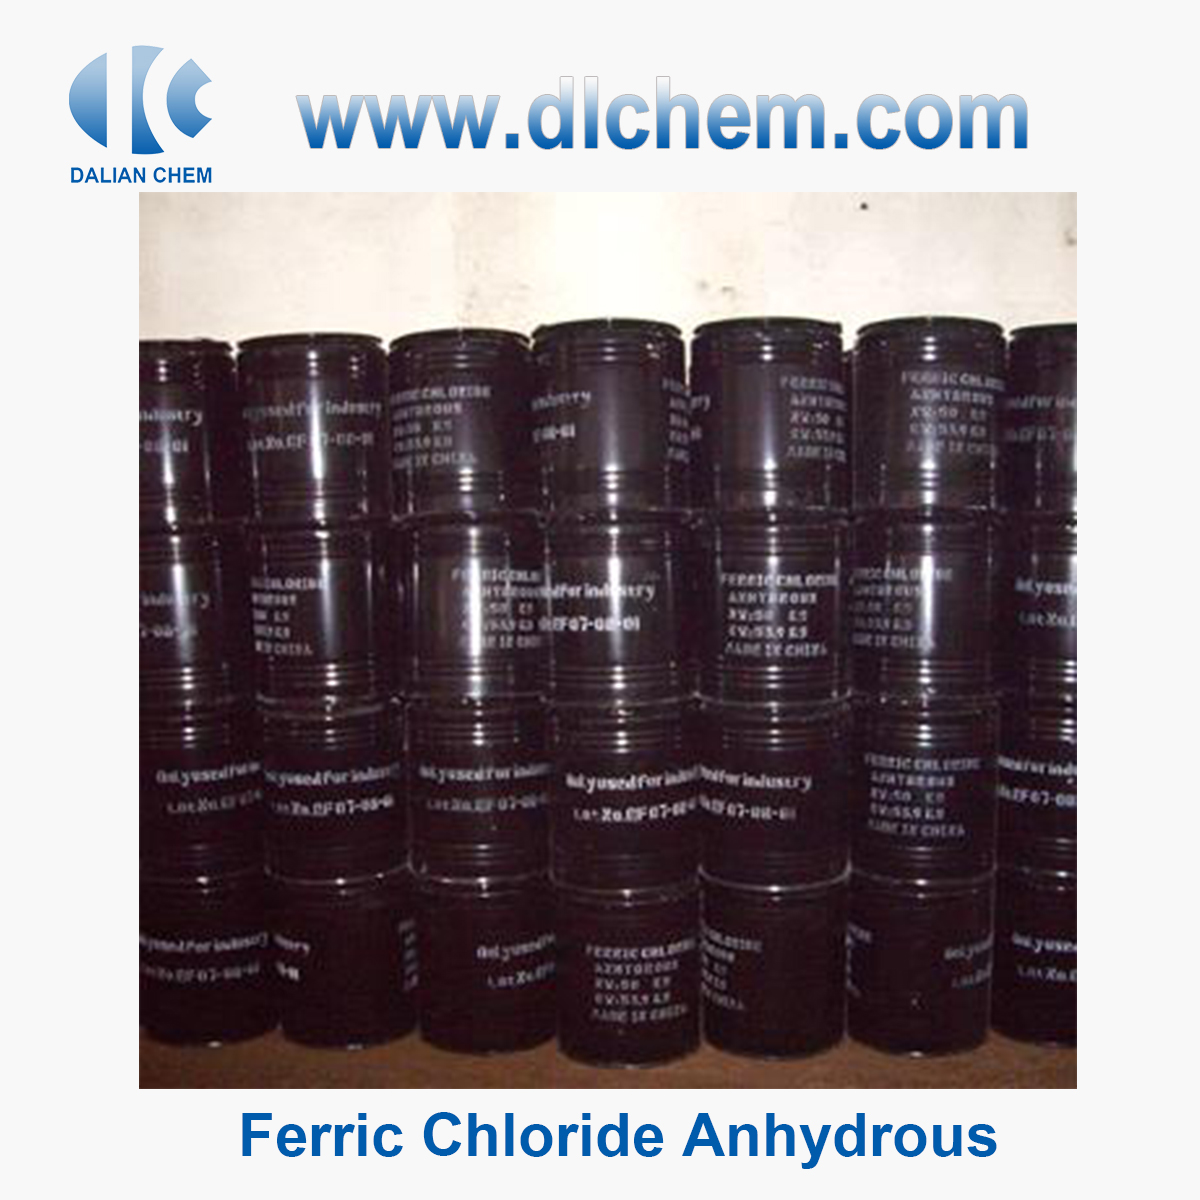 Ferric Chloride Anhydrous CAS No.7705-08-0